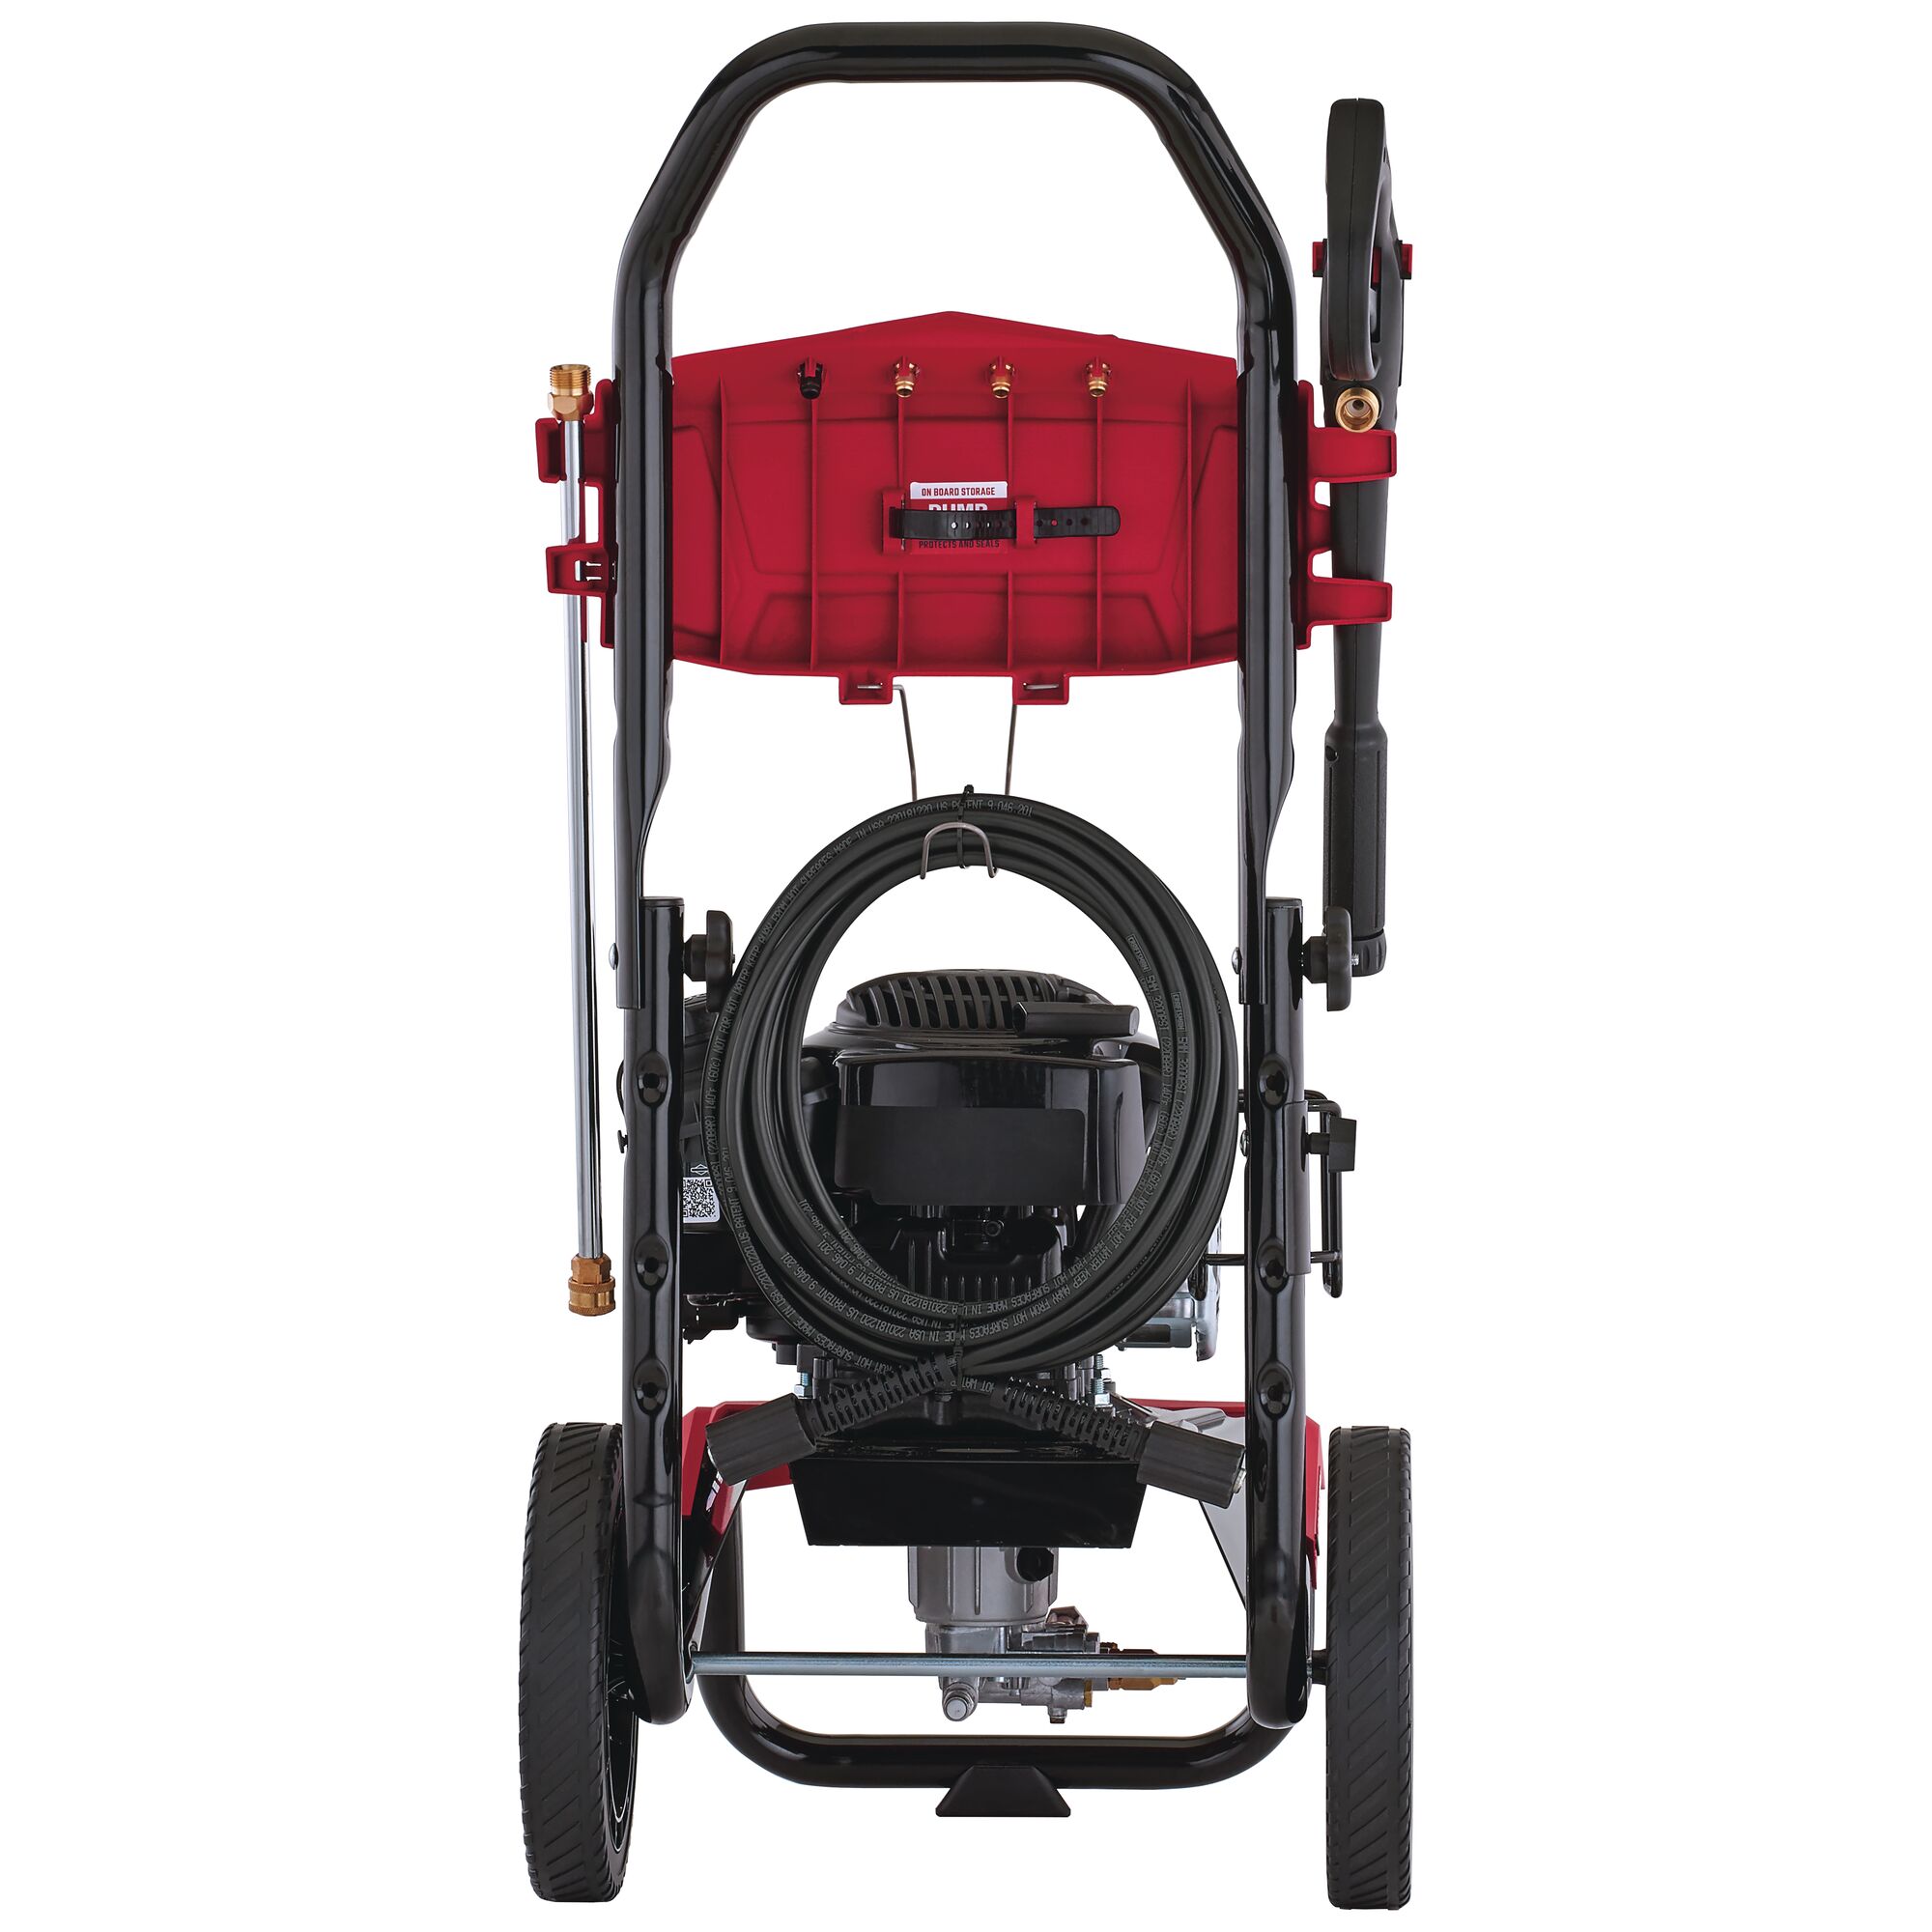 Backside of 2800 MAX Pounds per Square Inch or 2 and three tenths MAX Gallons Per Minute Pressure Washer.